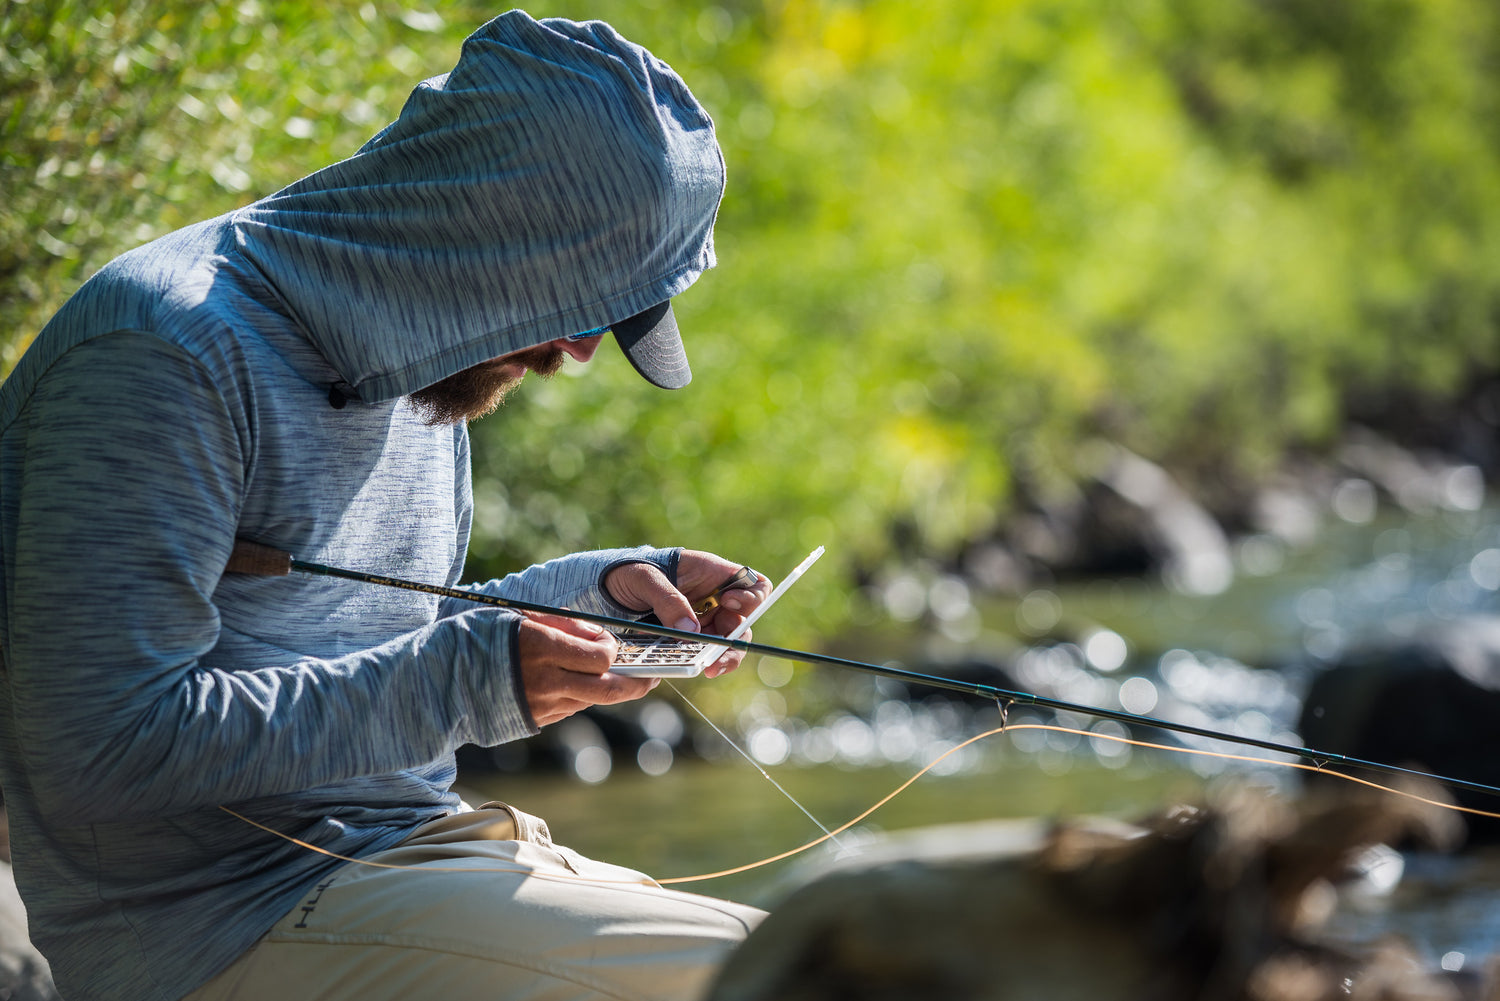 Field & Stream includes our River Run Hoody in "Best New Flyfishing Products" — just in time for Christmas.